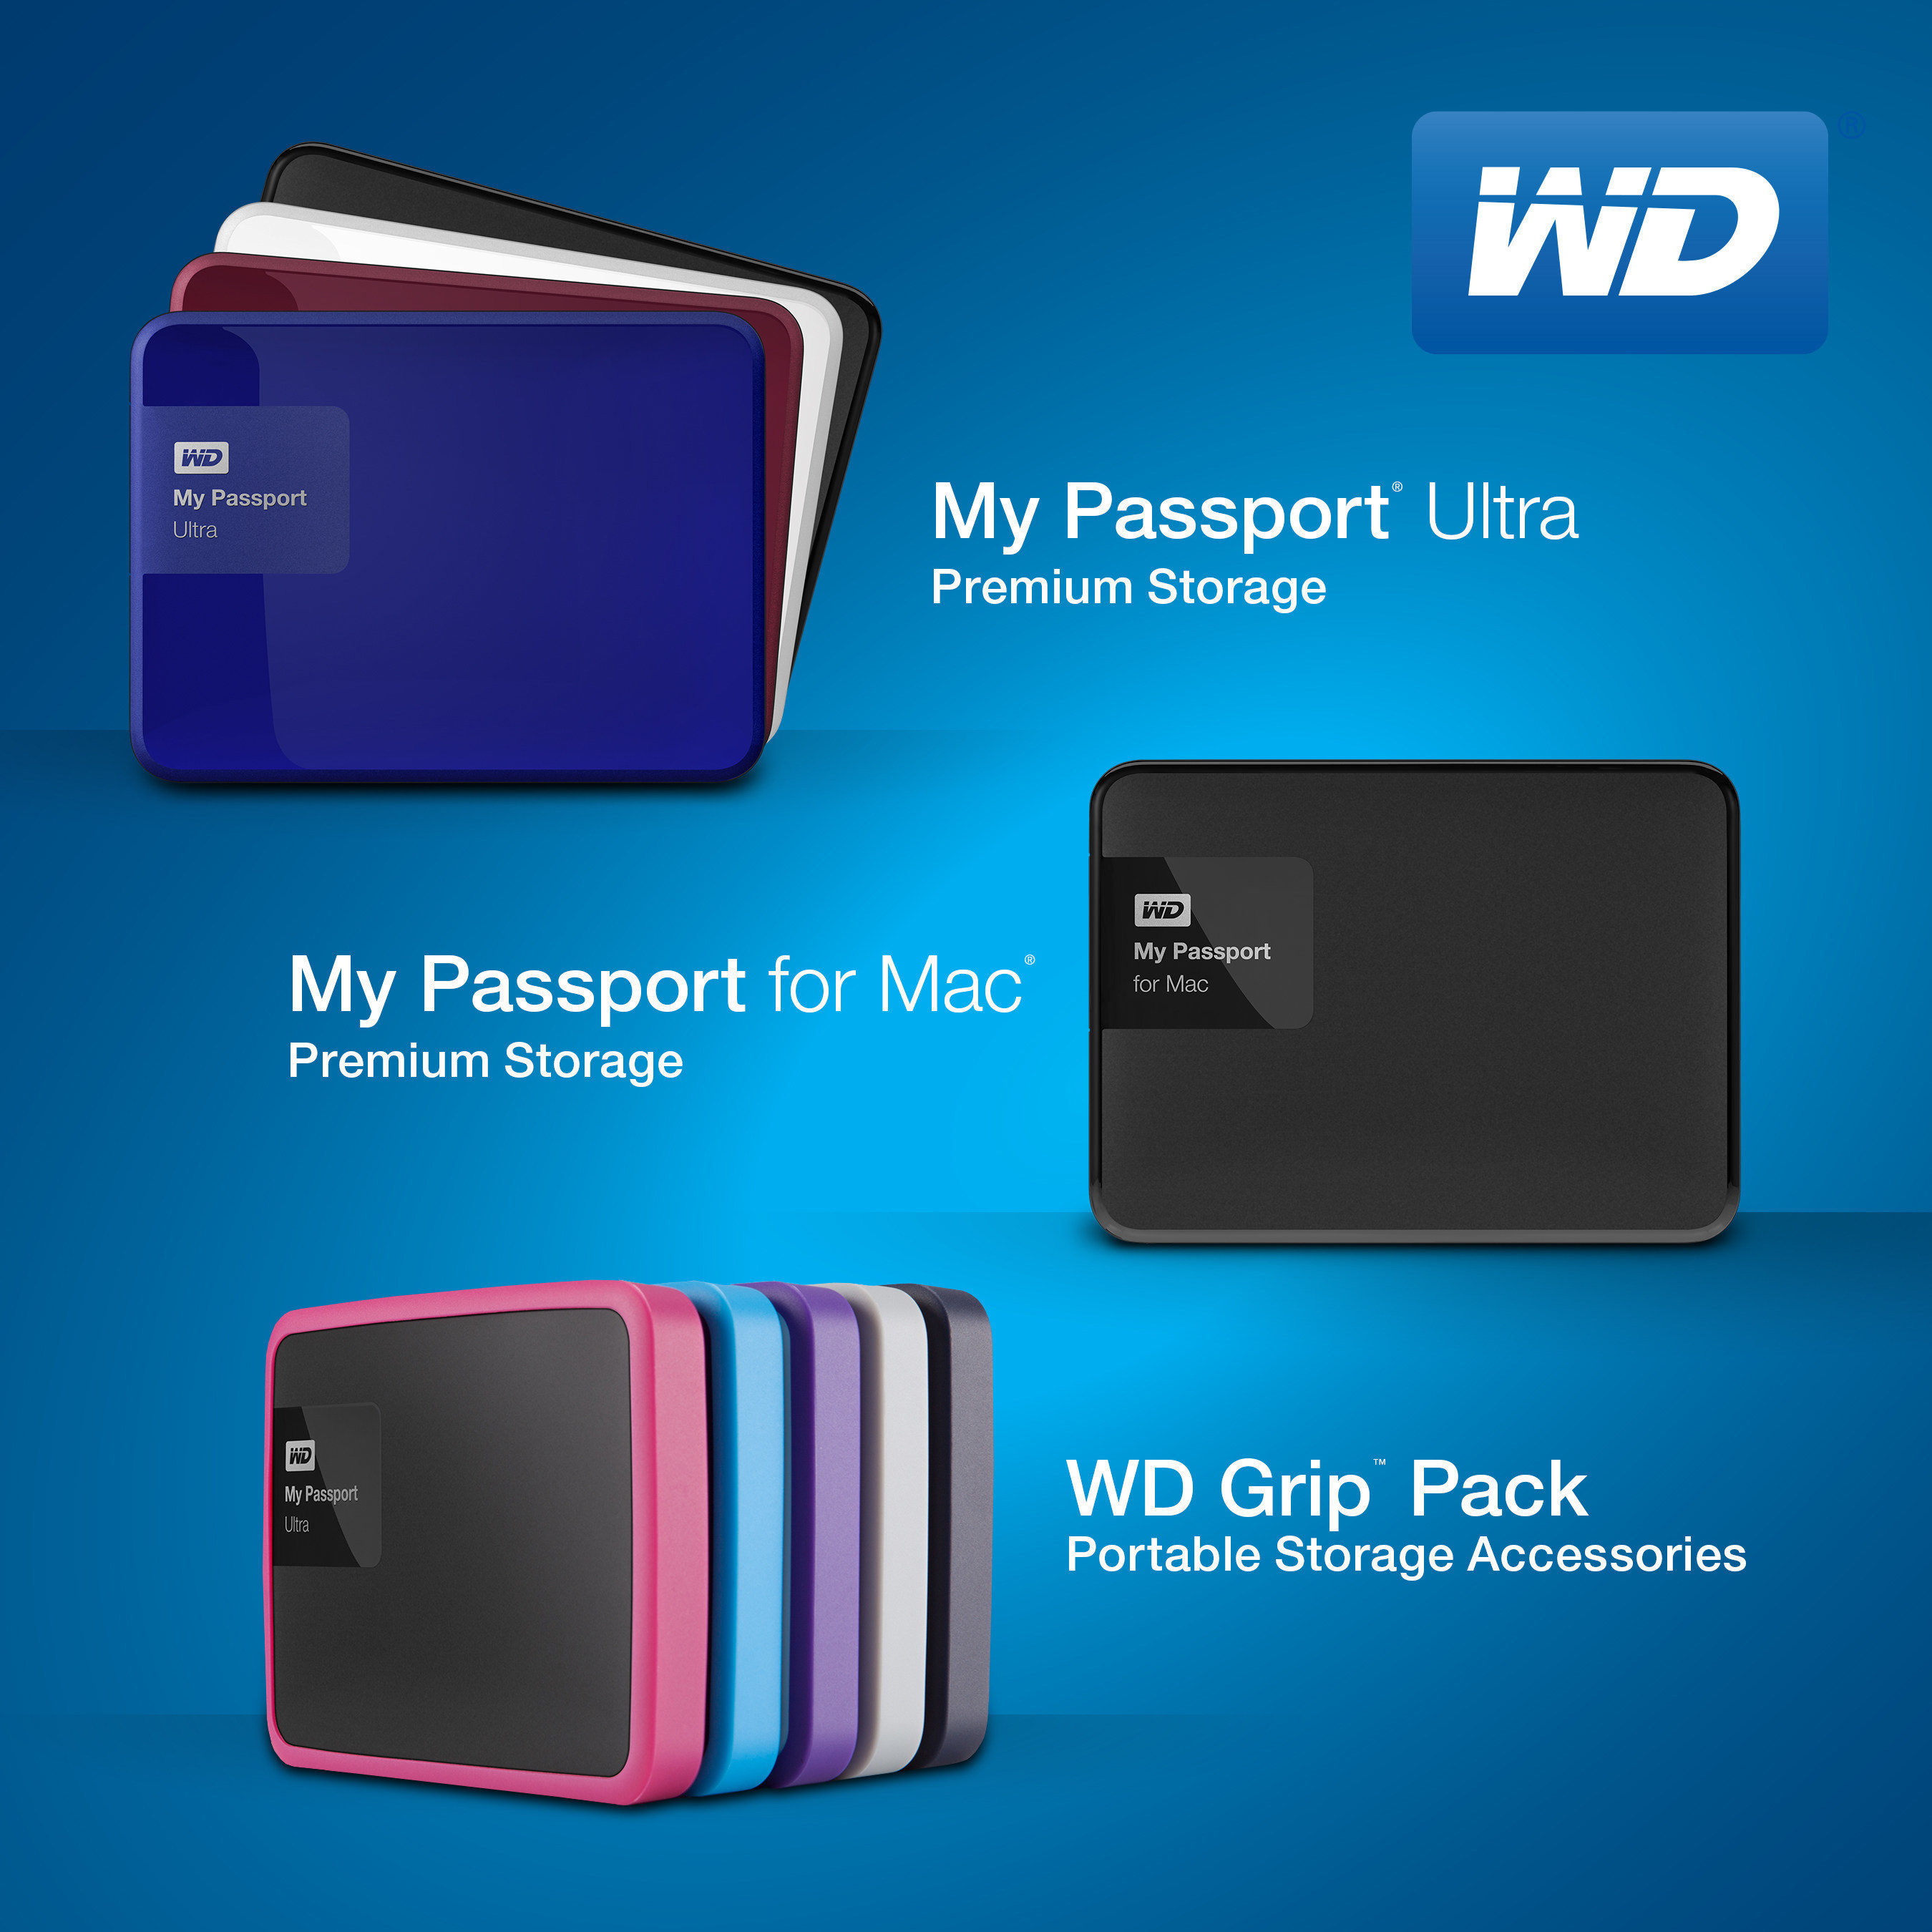 WD Redesigns World's No. 1 Selling Portable Hard Drive